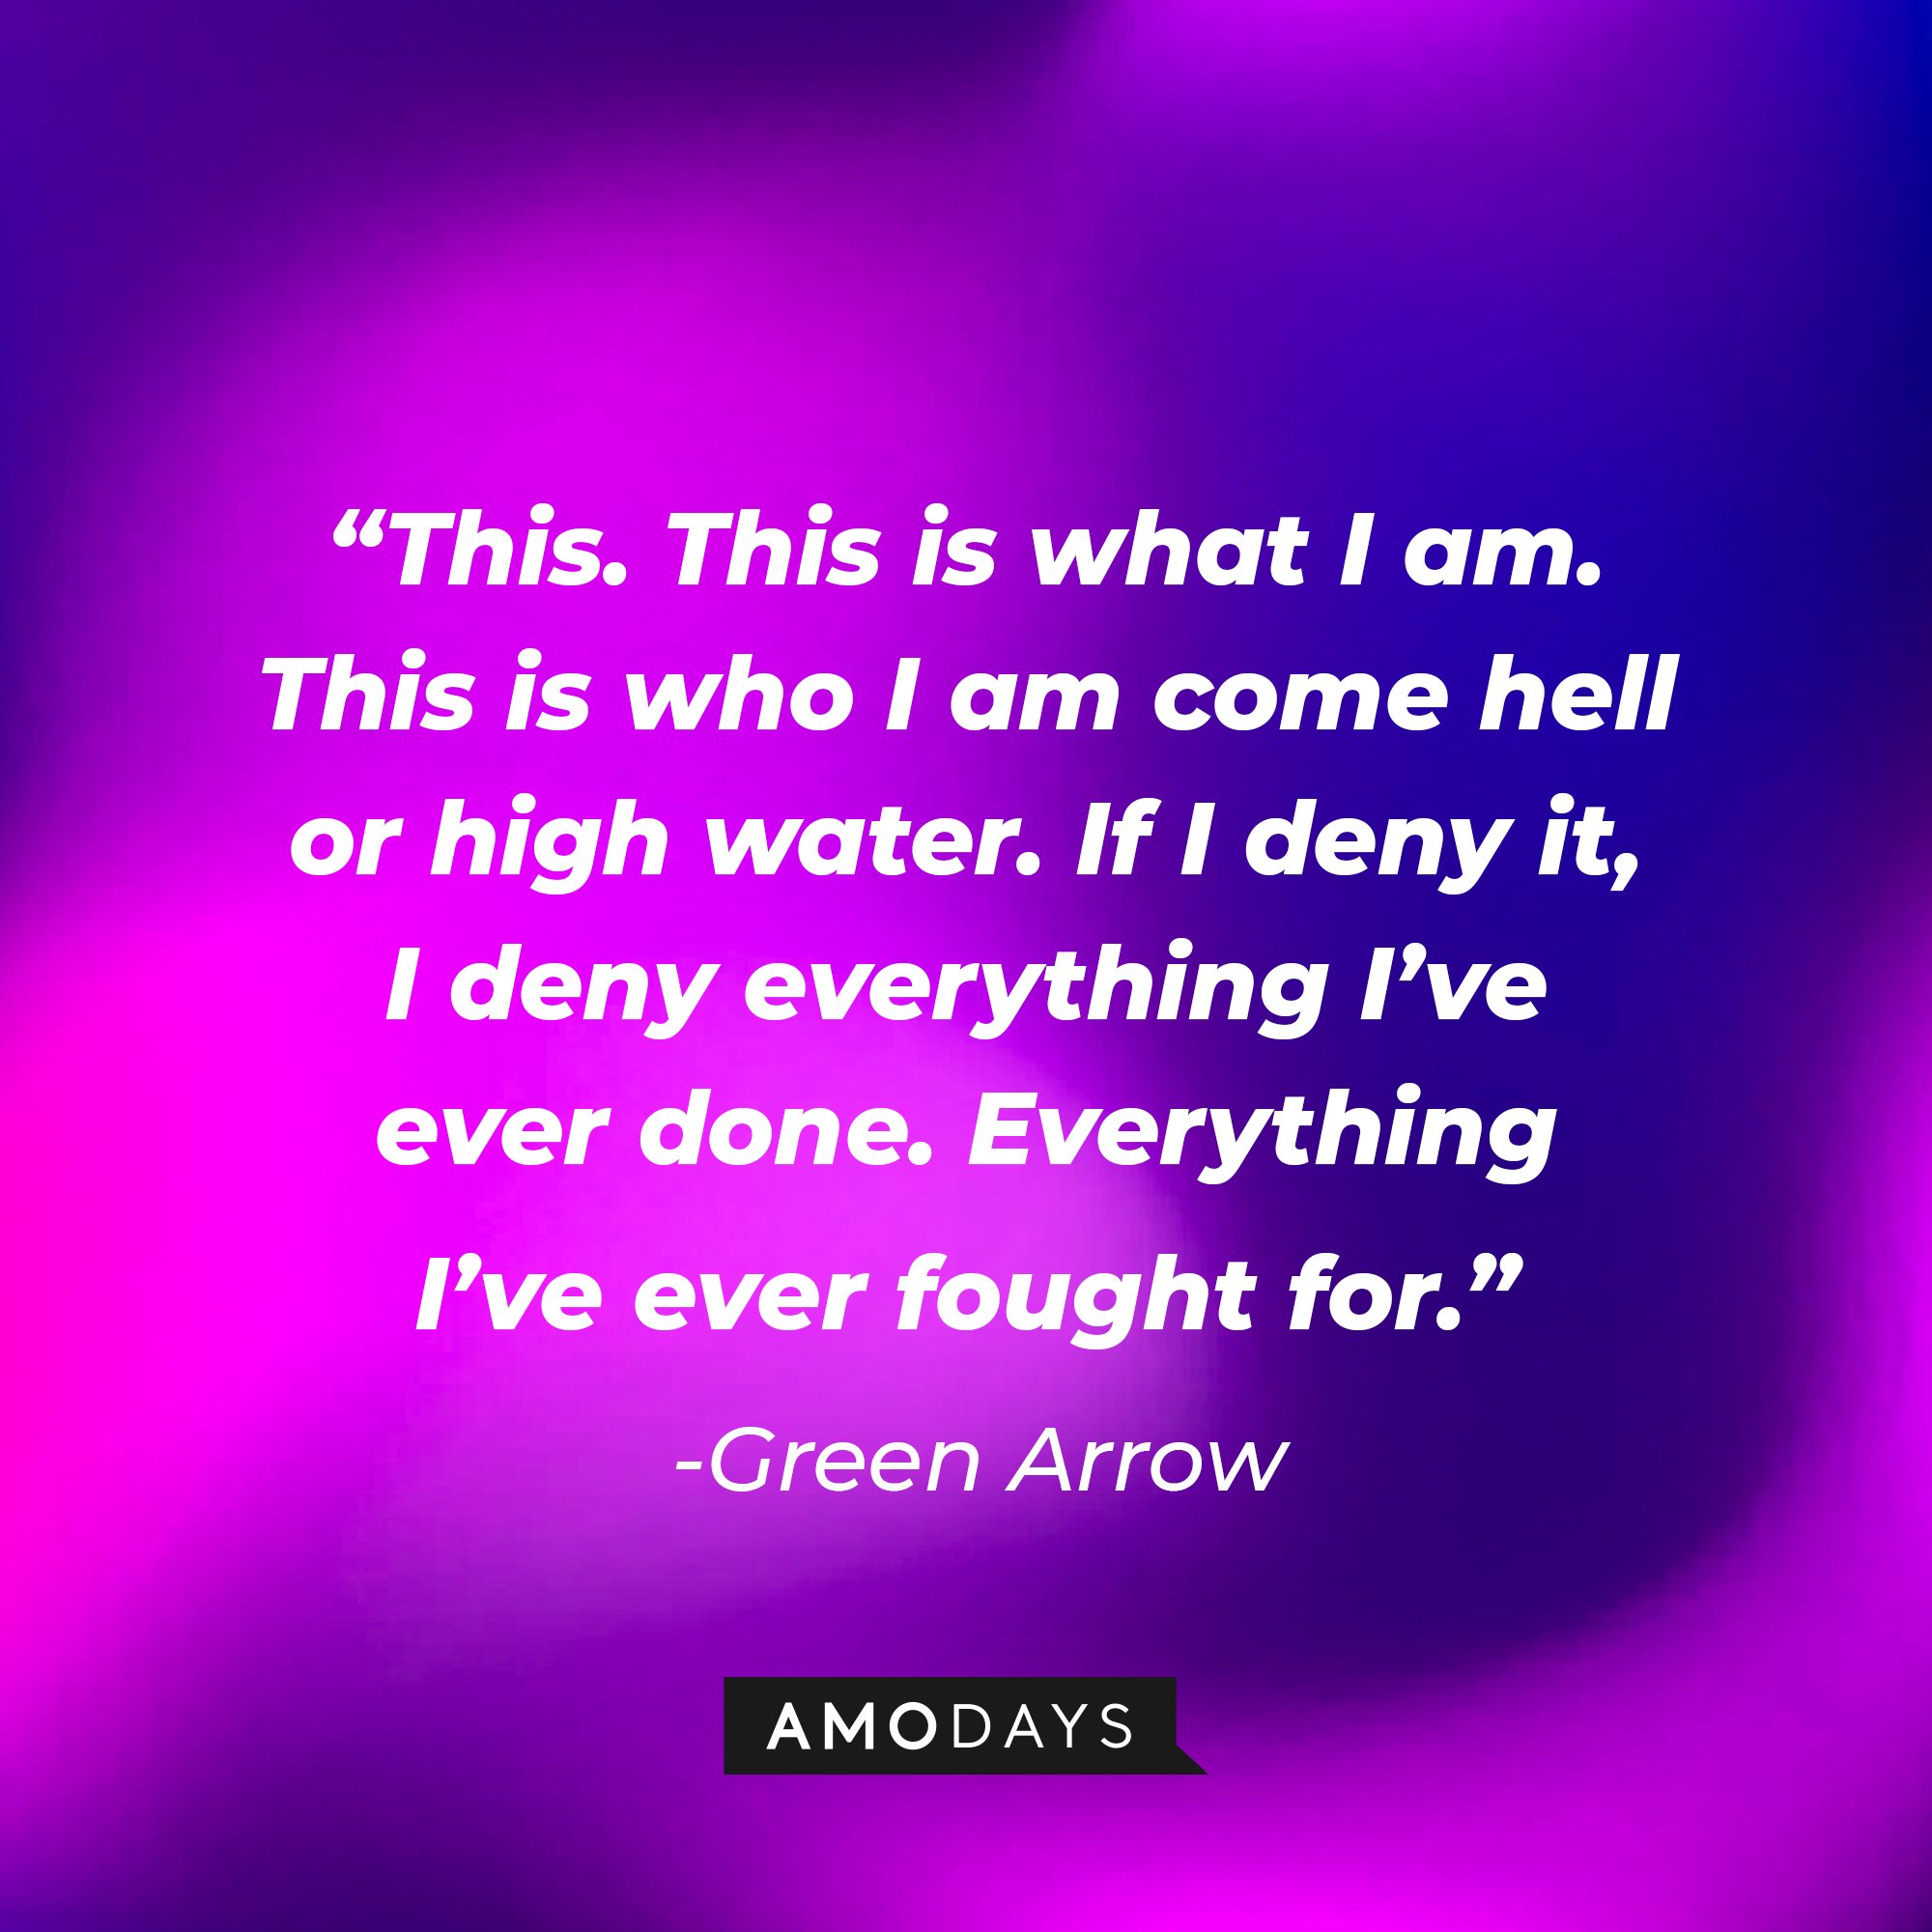 Green Arrow's quote: “This. This is what I am. This is who I am come hell or high water. If I deny it, I deny everything I’ve ever done. Everything I’ve ever fought for.” | Image: AmoDays